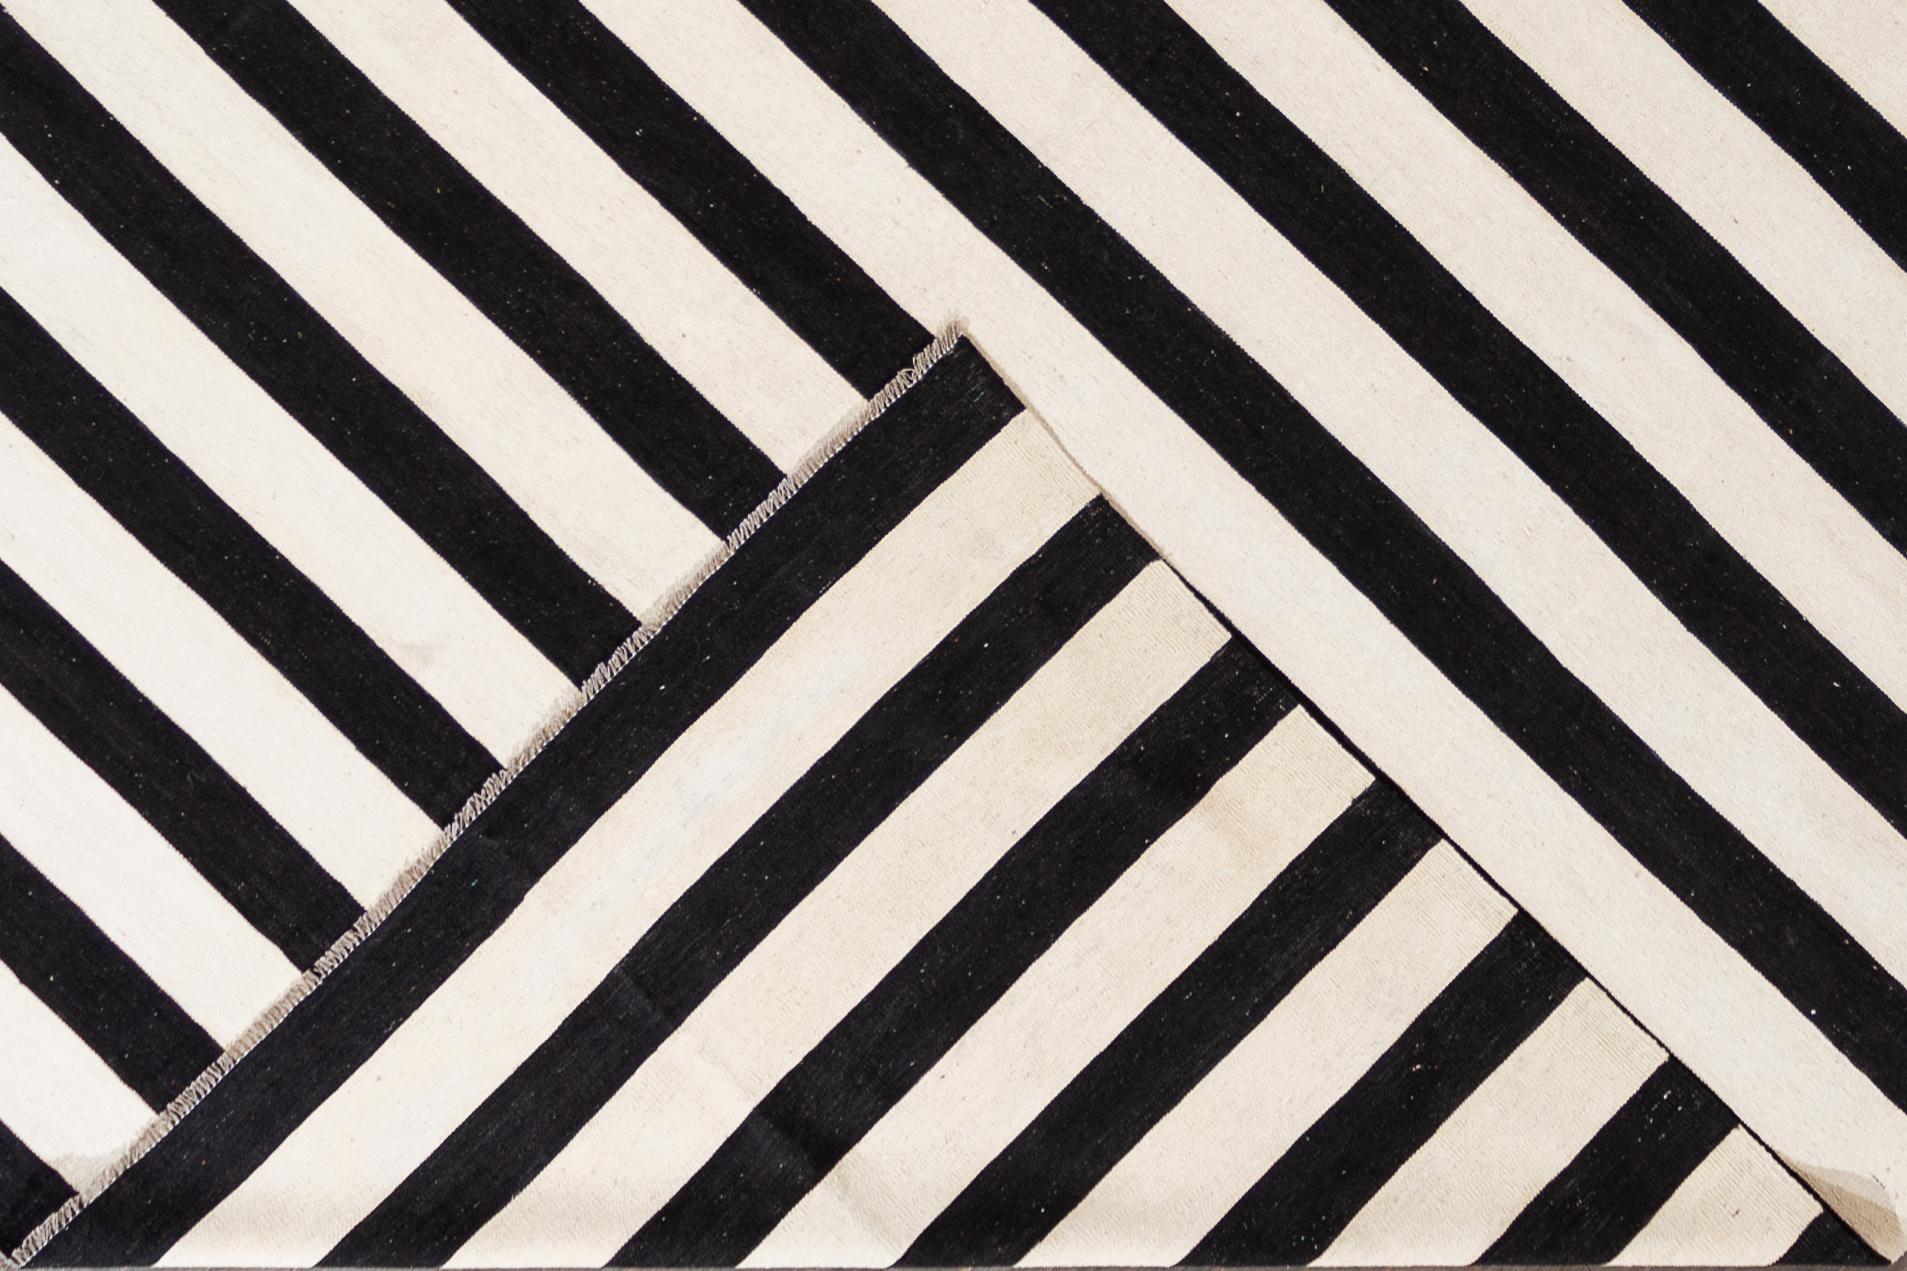 Beautiful 21st century contemporary Kilim rug, handwoven wool in an all-over black and white striped design.

This rug measures 12' 1